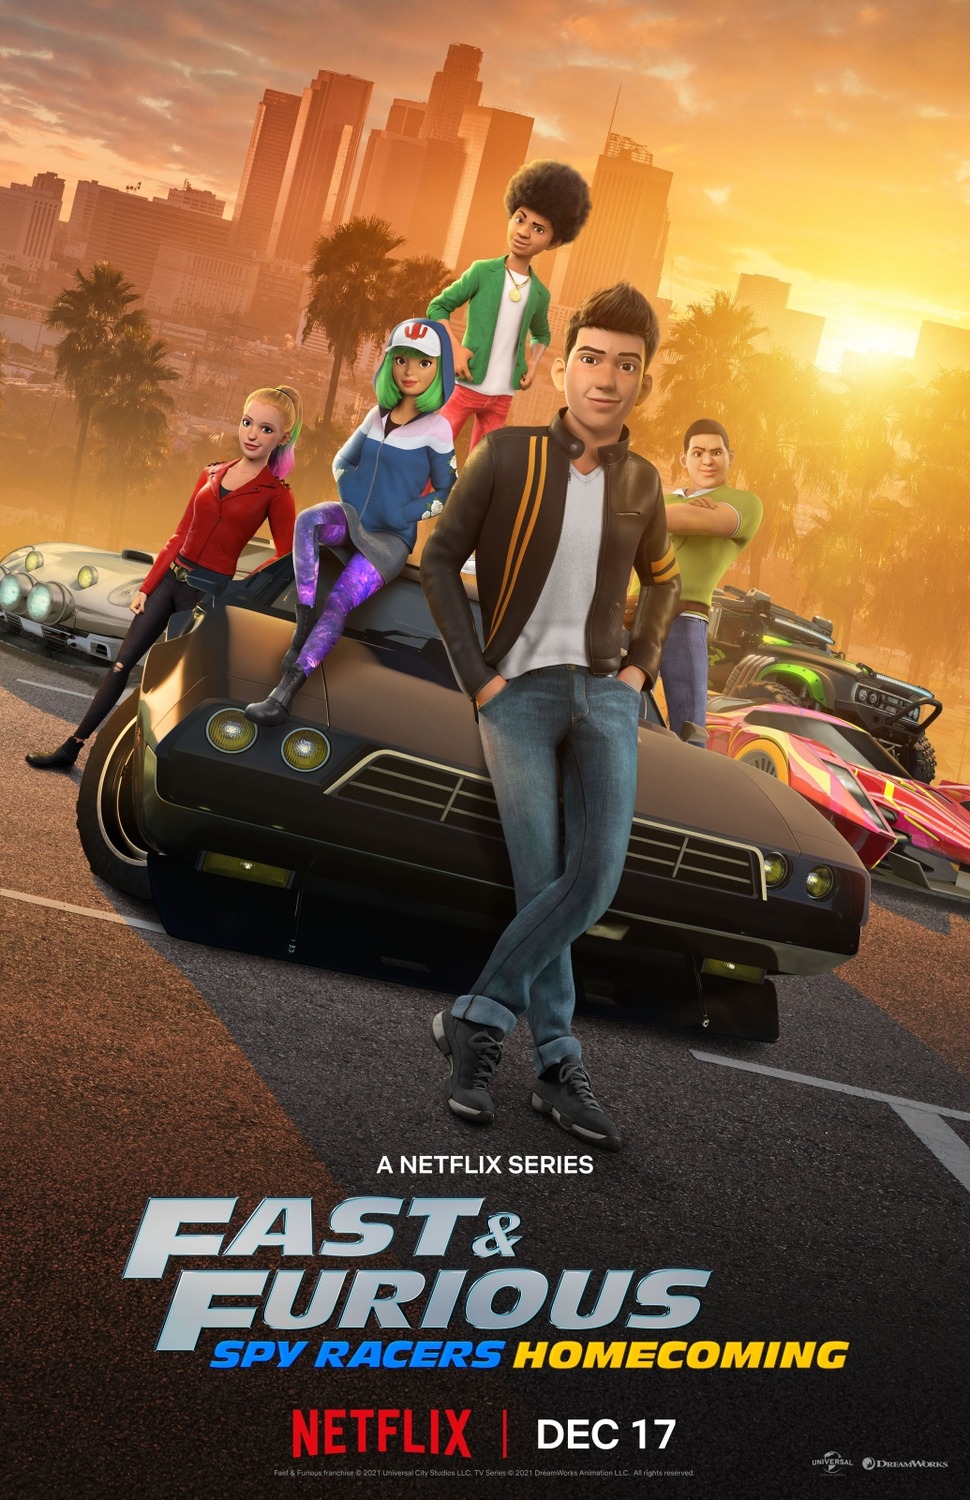 Season 6 (Fast & Furious: Spy Racers). The Fast and the Furious